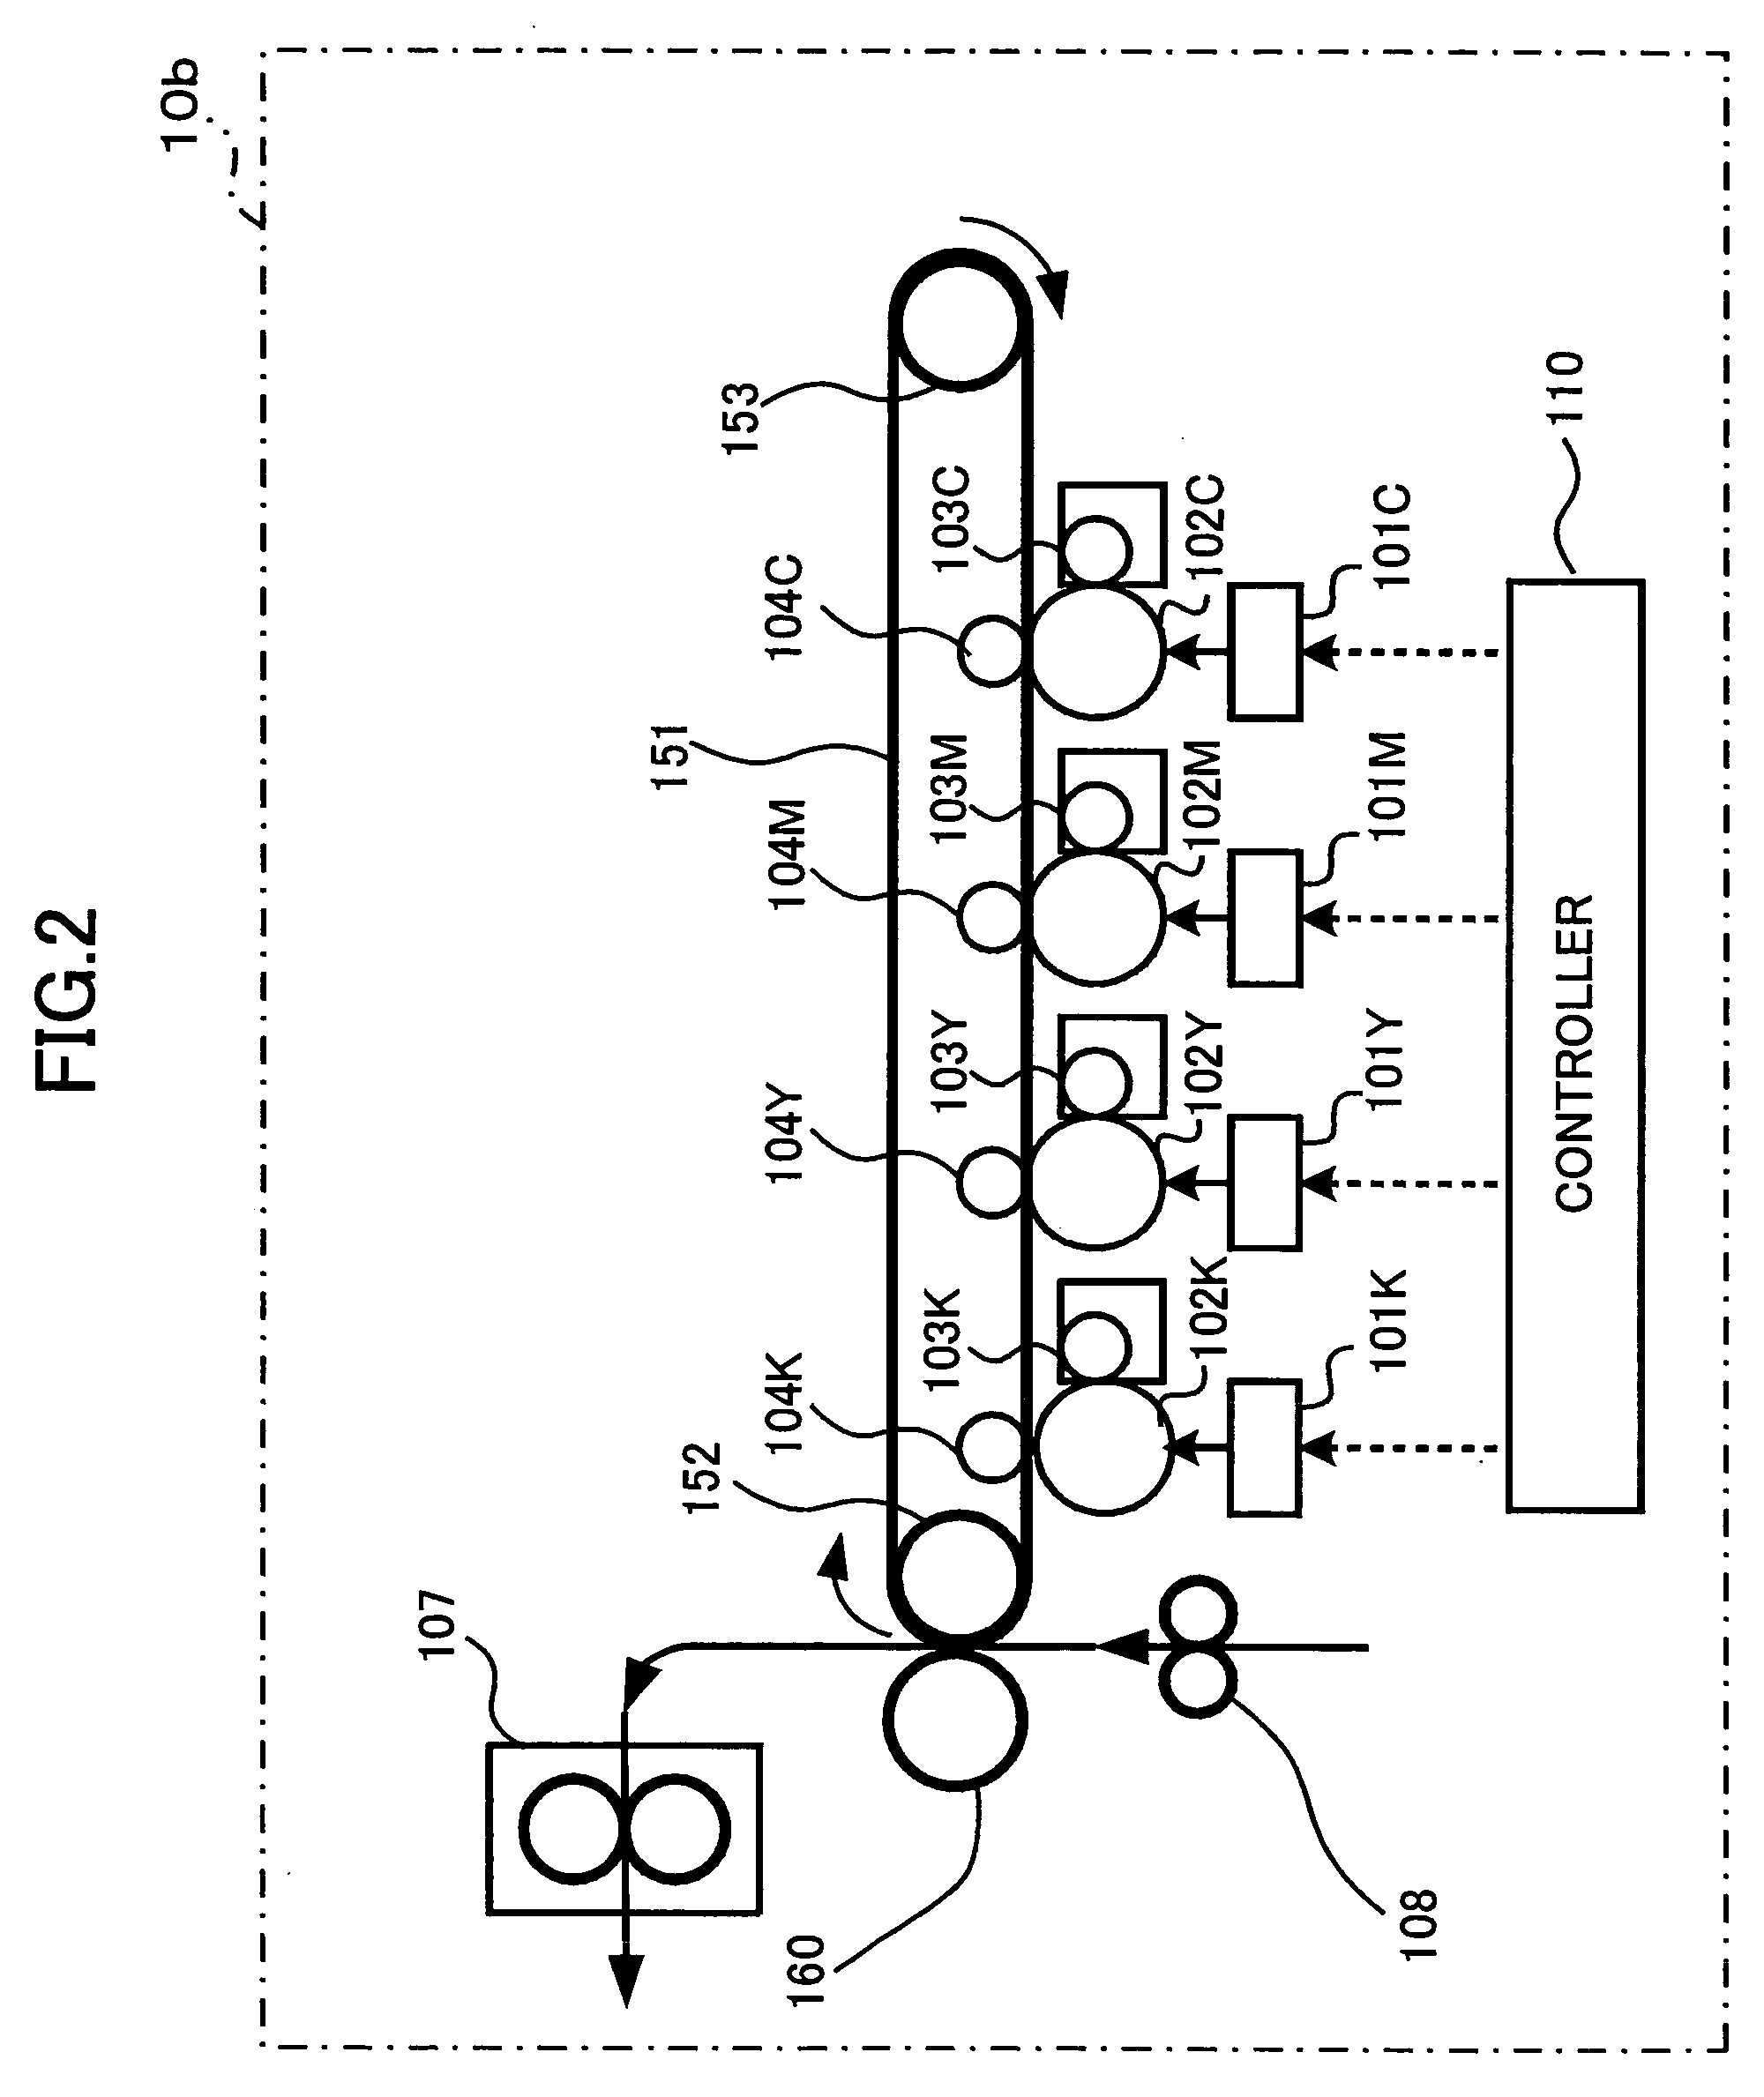 Image forming apparatus with transfer belt speed control